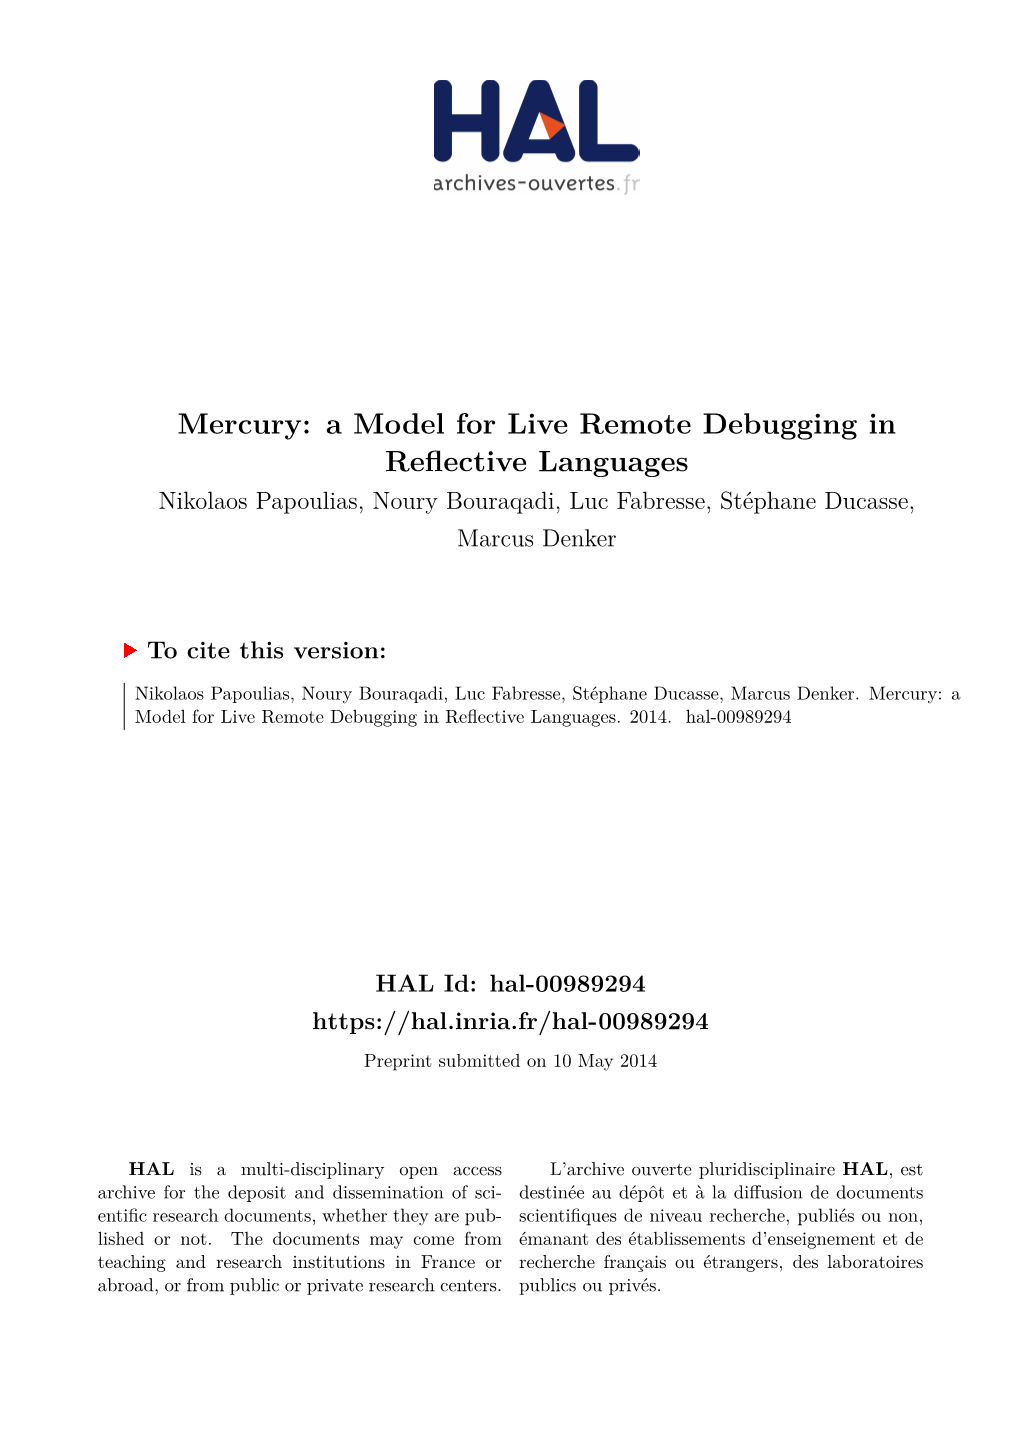 A Model for Live Remote Debugging in Reflective Languages Nikolaos Papoulias, Noury Bouraqadi, Luc Fabresse, Stéphane Ducasse, Marcus Denker